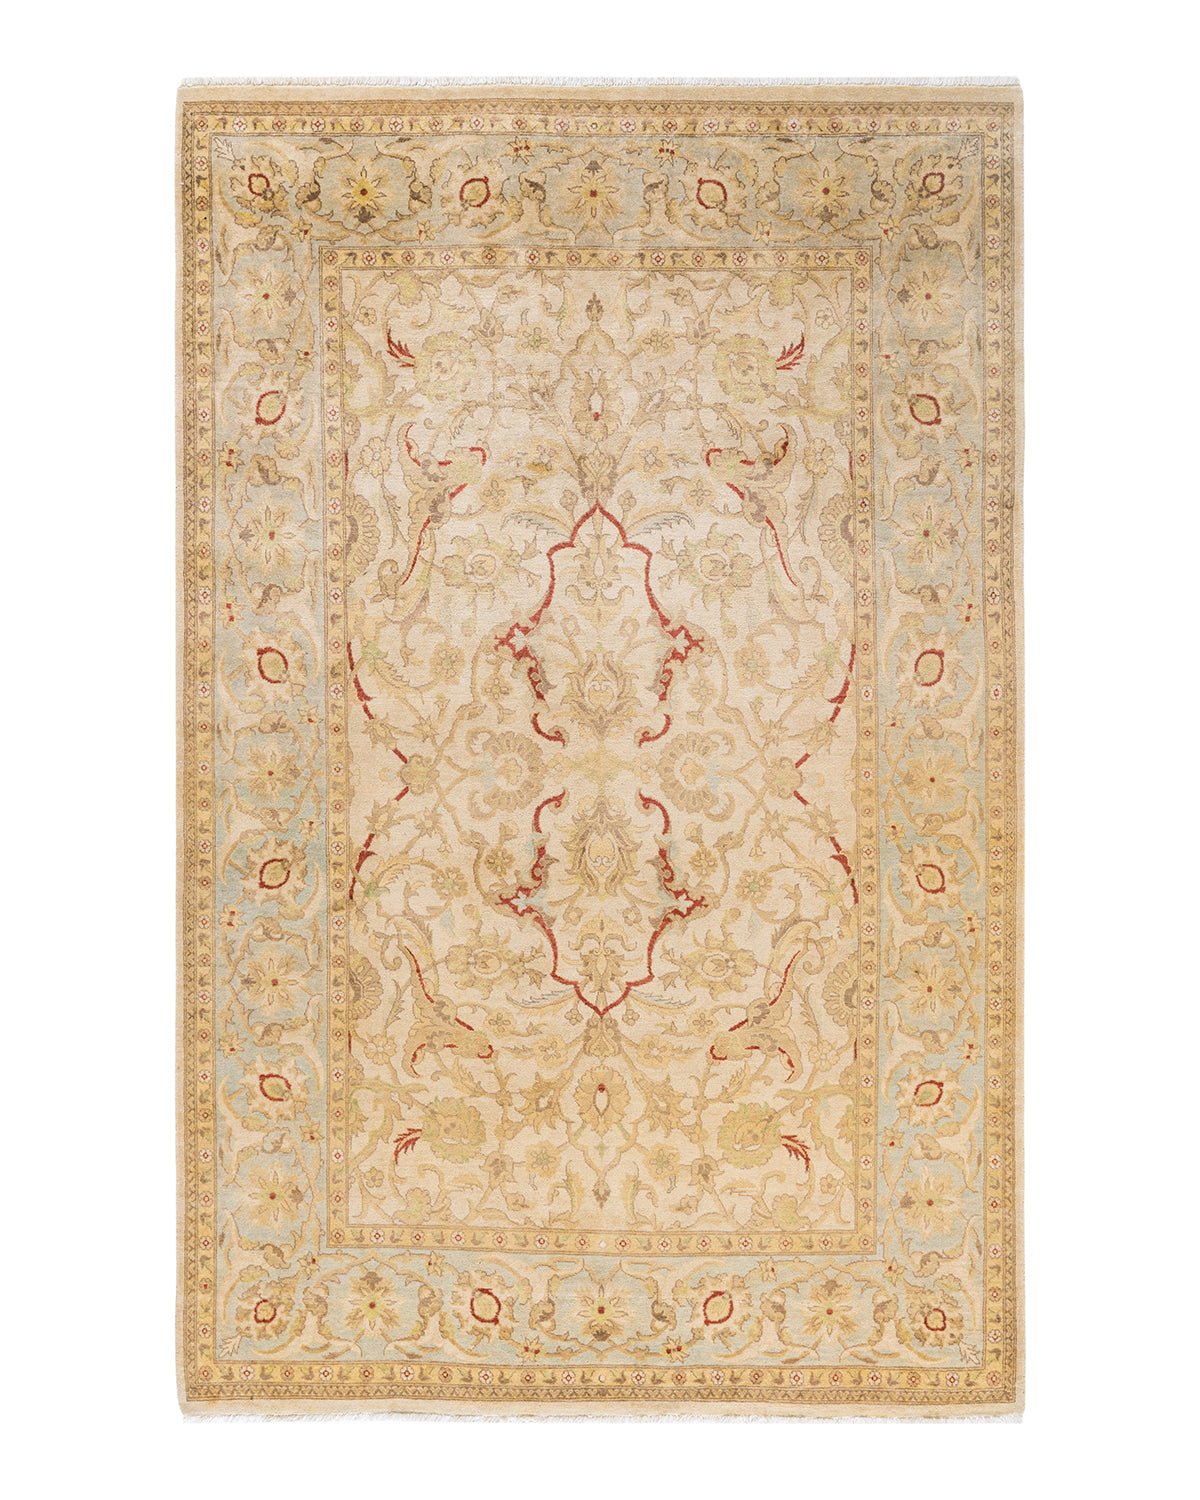 Eclectic, One-of-a-Kind Hand-Knotted Area Rug  - Ivory, 6' 2" x 9' 7"